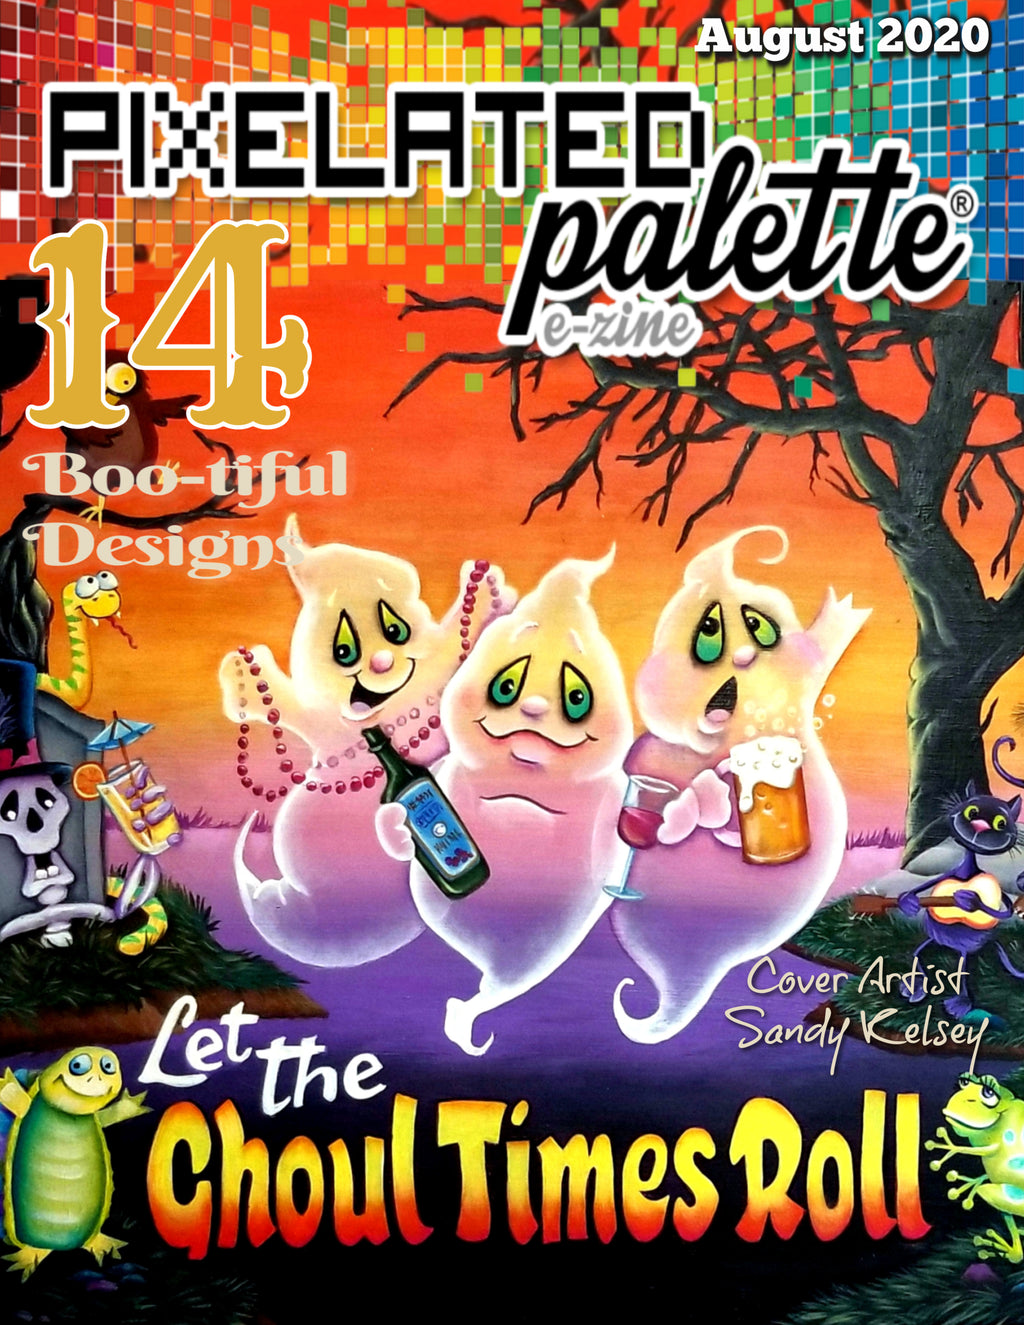 Pixelated Palette - August 2020 Issue Download